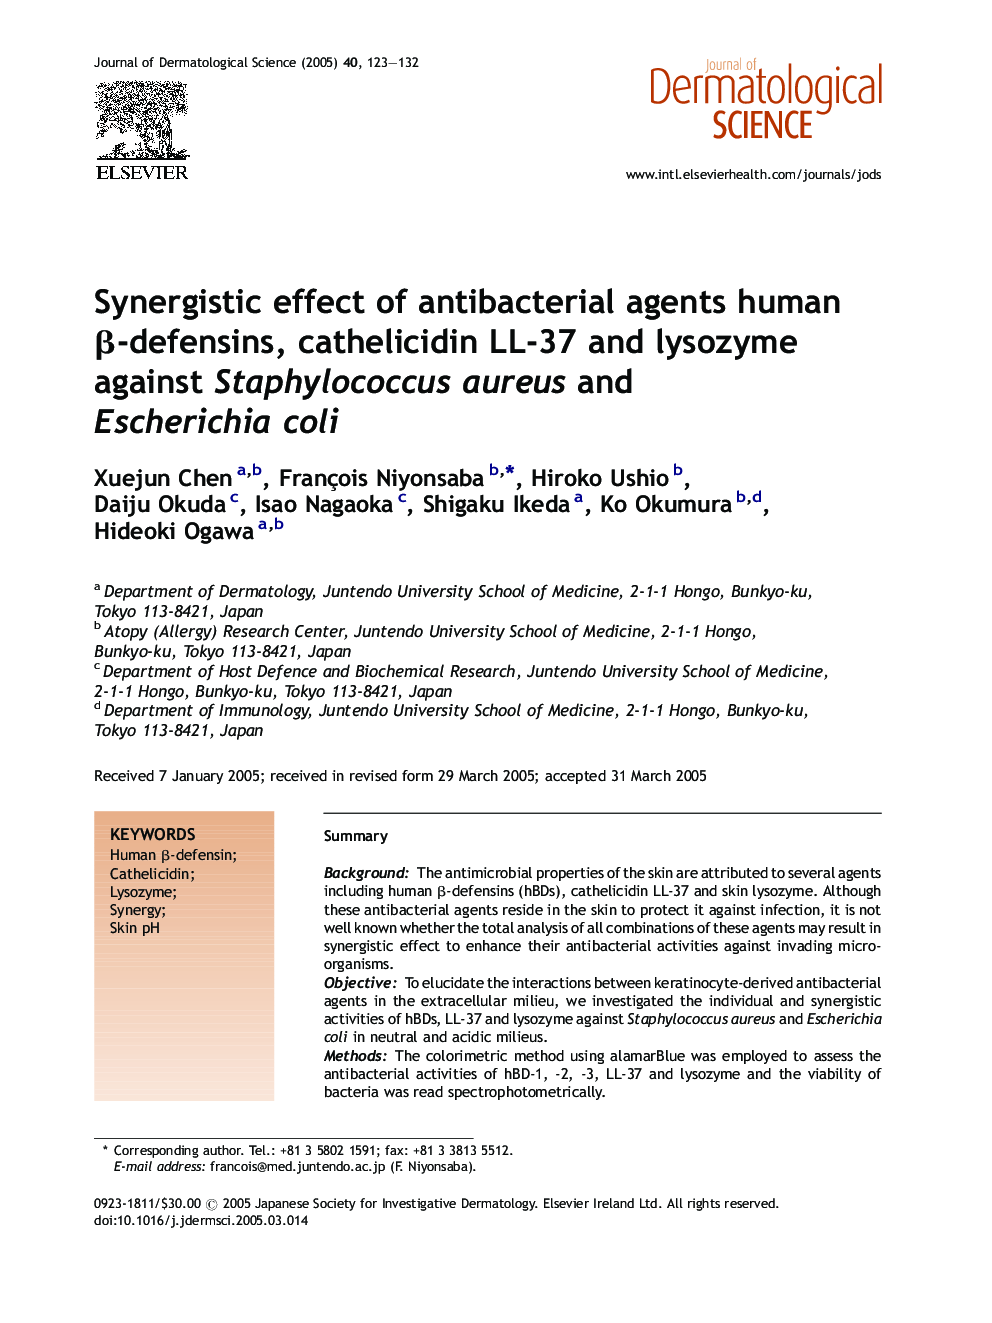 Synergistic effect of antibacterial agents human Î²-defensins, cathelicidin LL-37 and lysozyme against Staphylococcus aureus and Escherichia coli